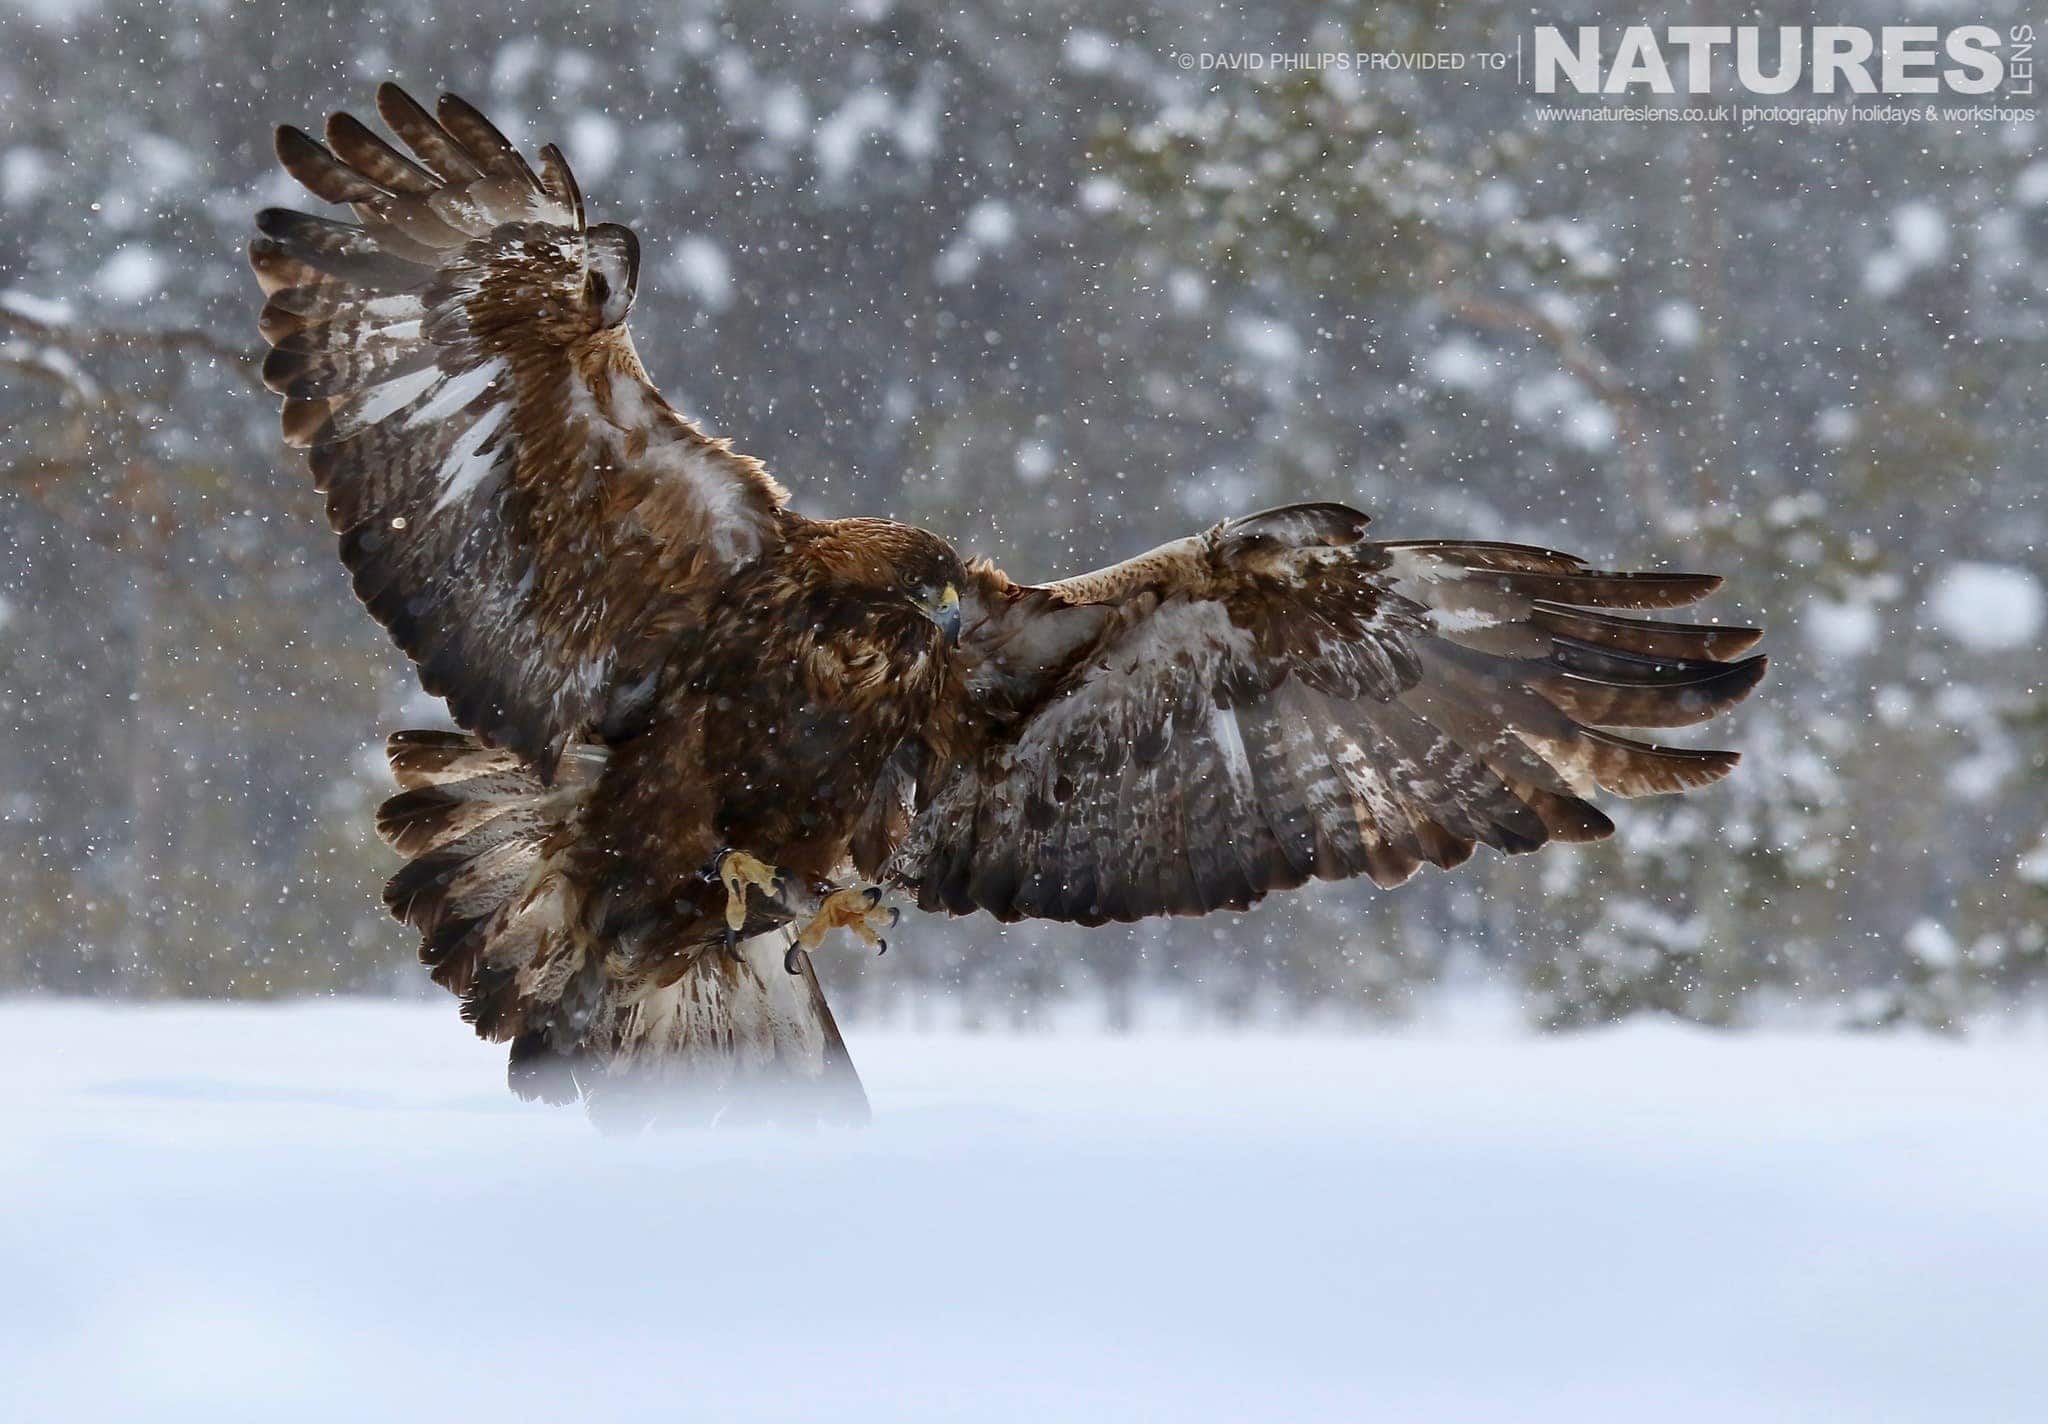 One Of The Golden Eagles Lands On The Snow Image Captured During The Natureslens Golden Eagles Of The Swedish Winter Photography Holiday